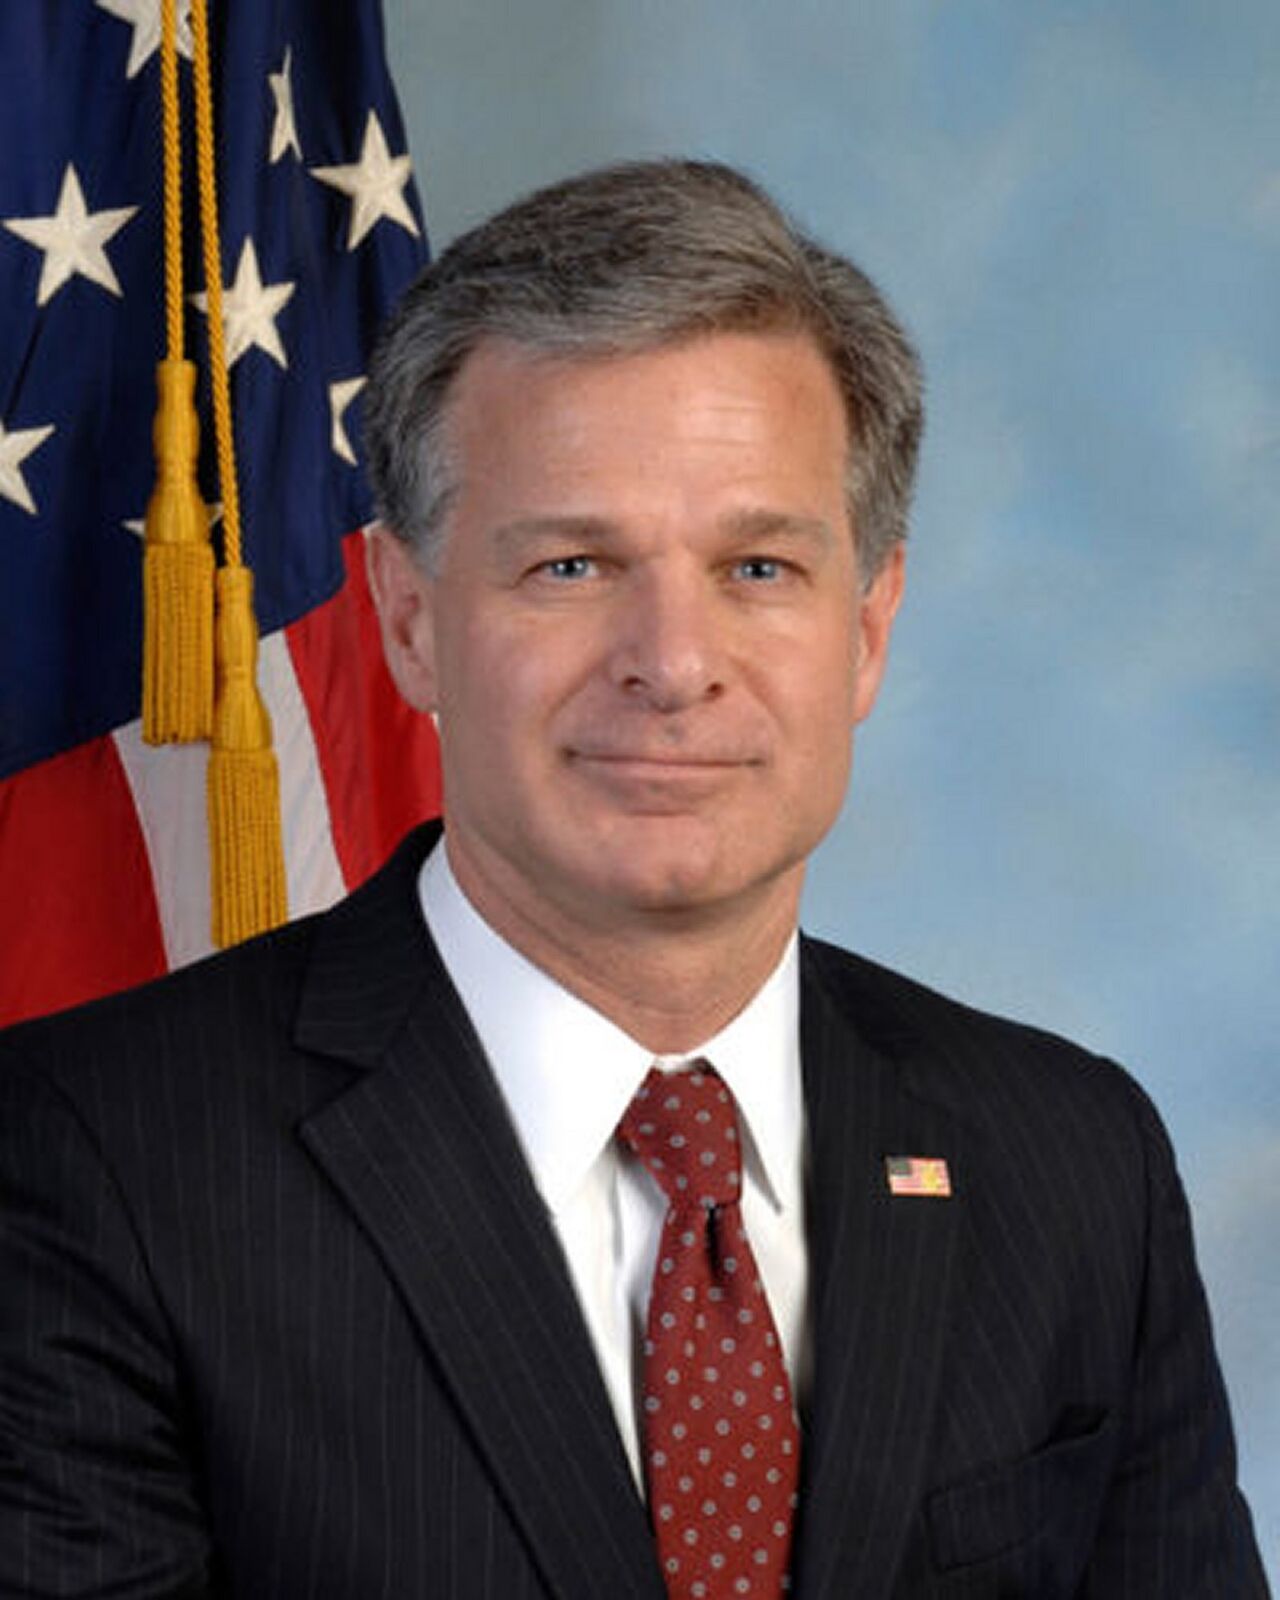 FBI DIRECTOR,  CHRISTOPHER A  WRAY,  OFFICIAL PORTRAIT PHOTO  (172-S )